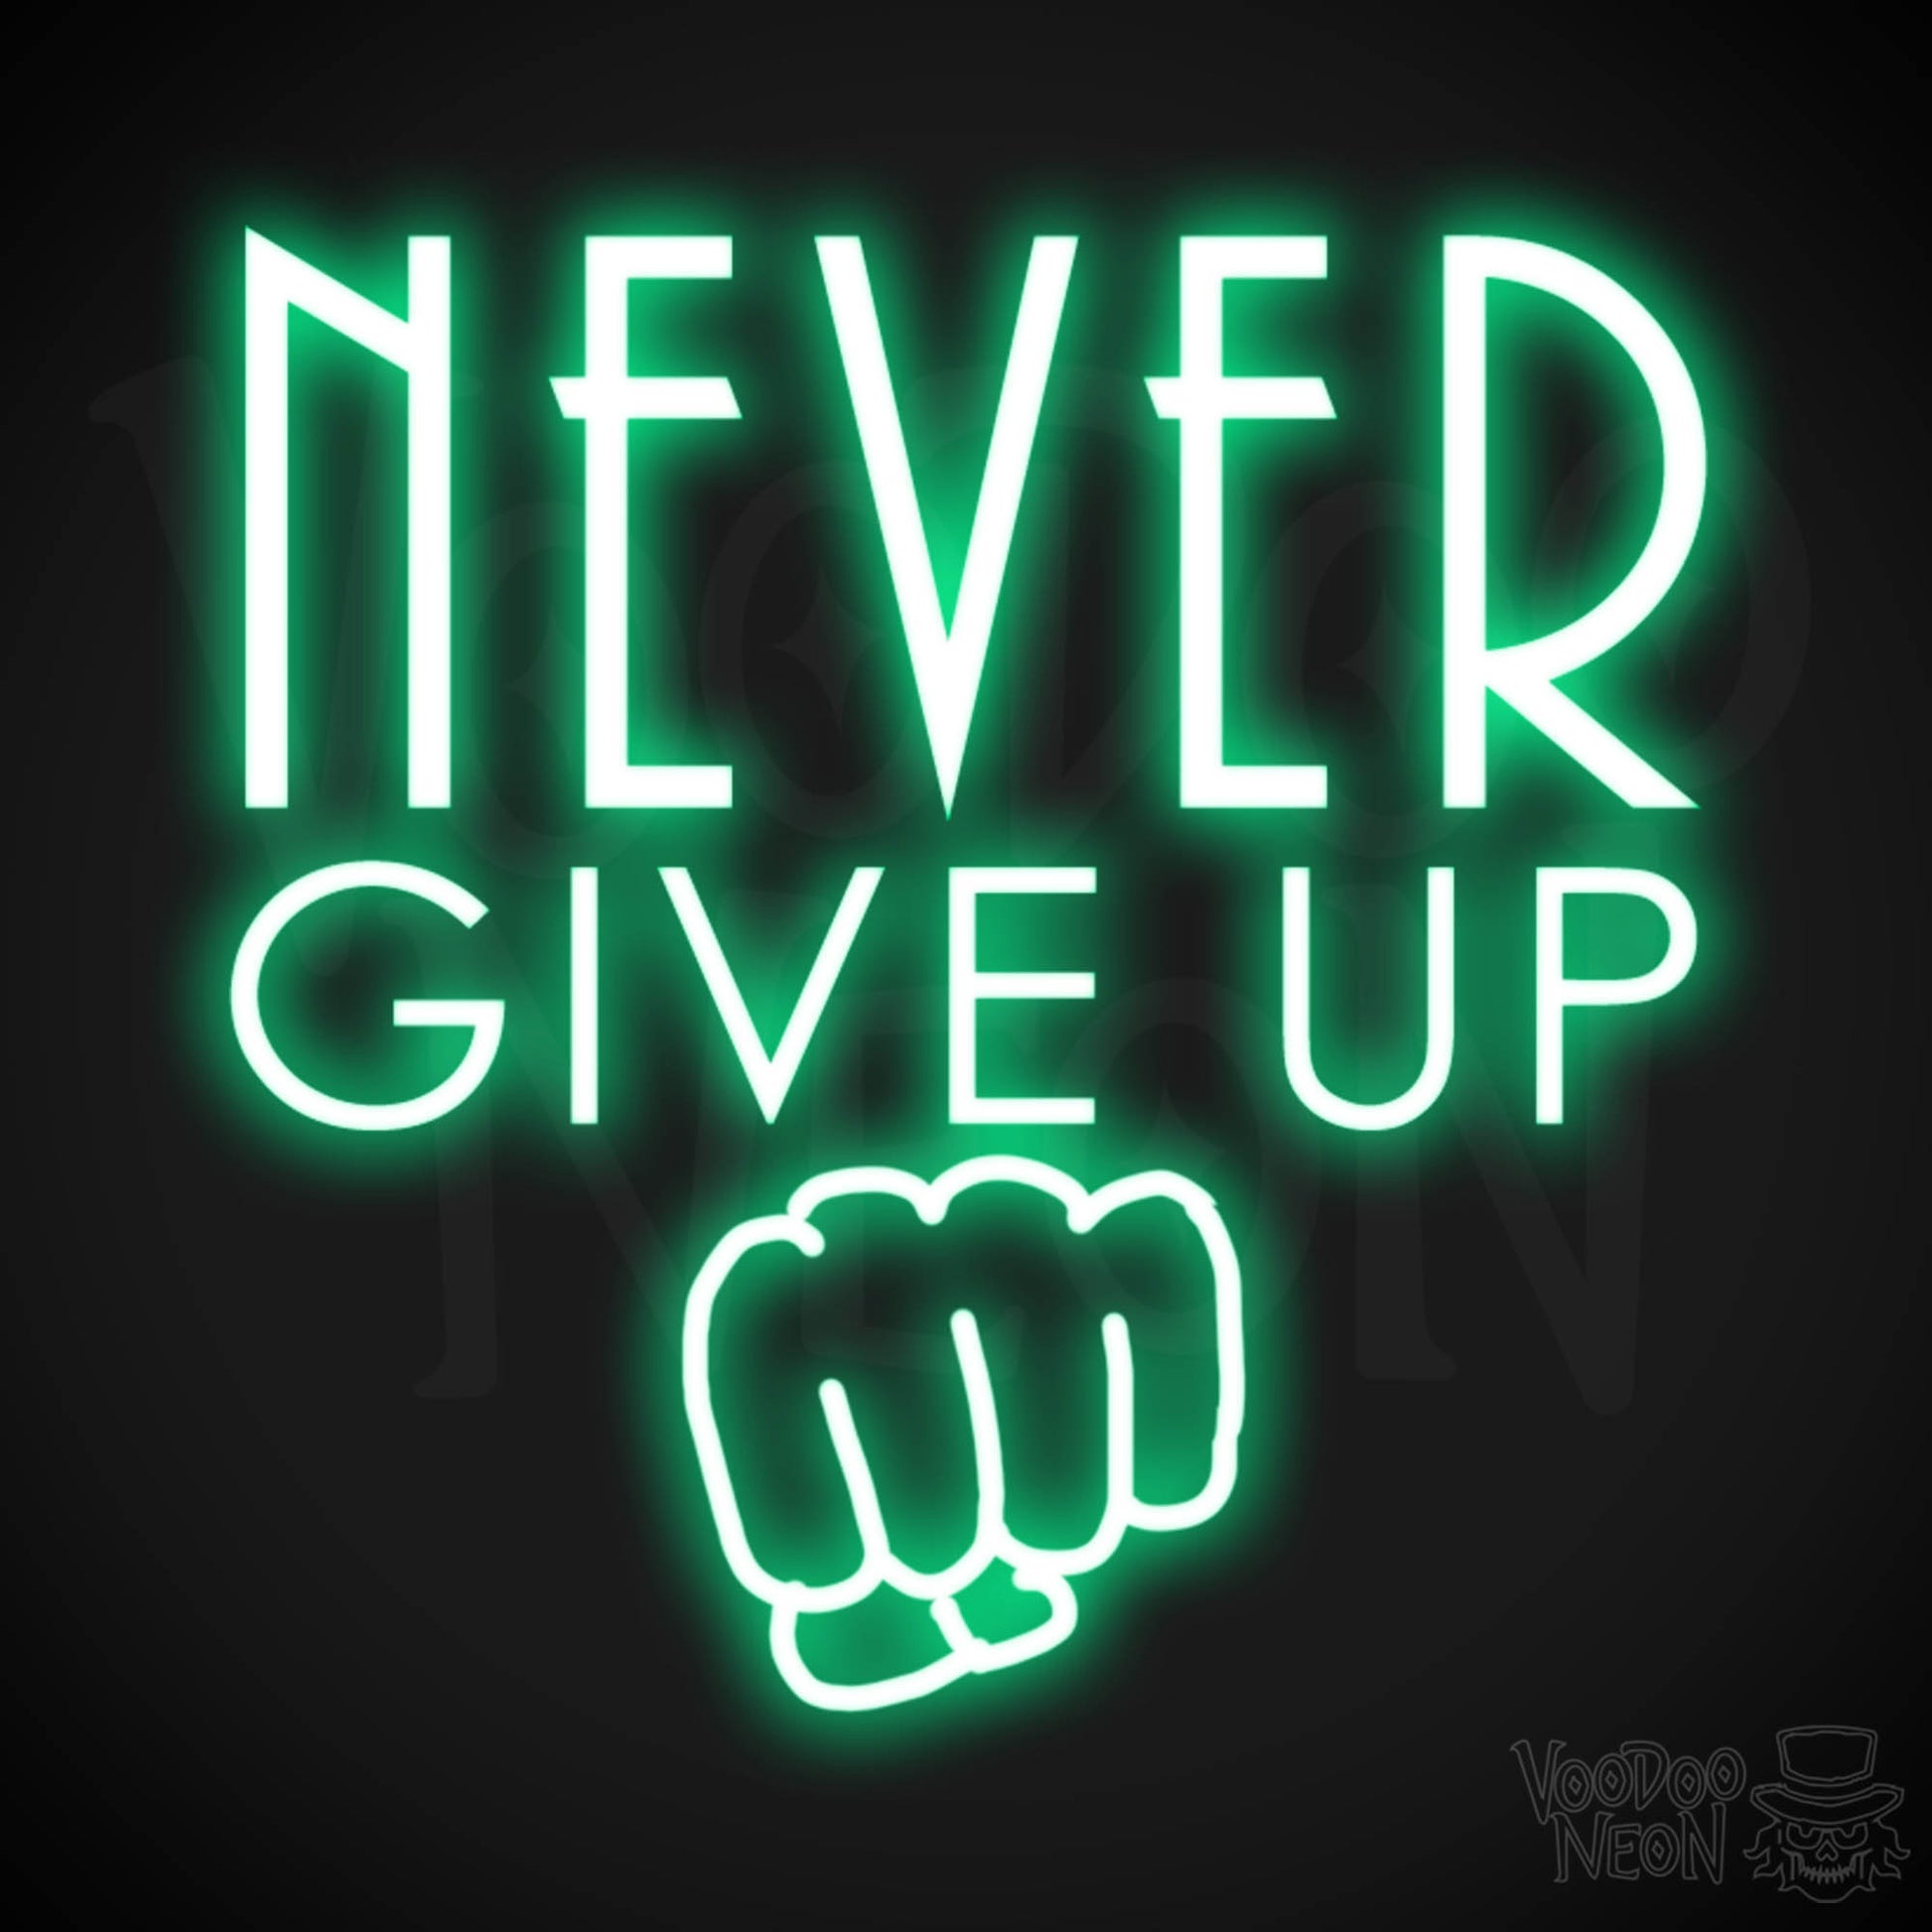 Never Give Up Neon Sign - Neon Never Give Up Sign - LED Sign - Color Green